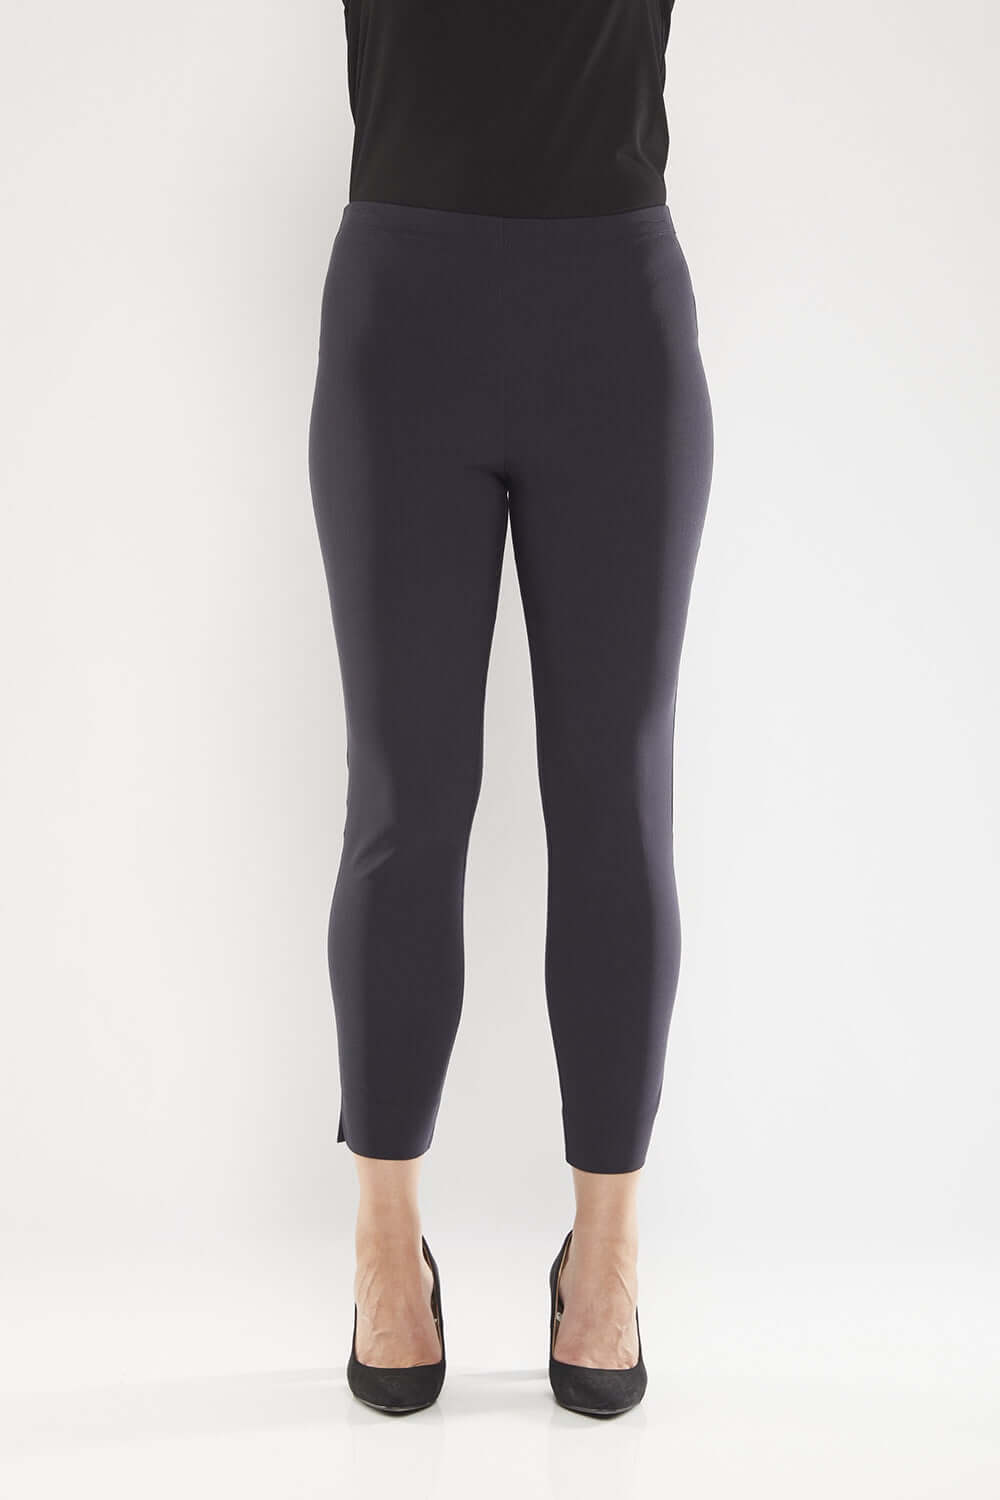 Philosophy EVERYDAY 7/8 Pant in Black PhilosophyNavy, pant, Philos S21, Philosophy, philosophy essential, stretch fabric